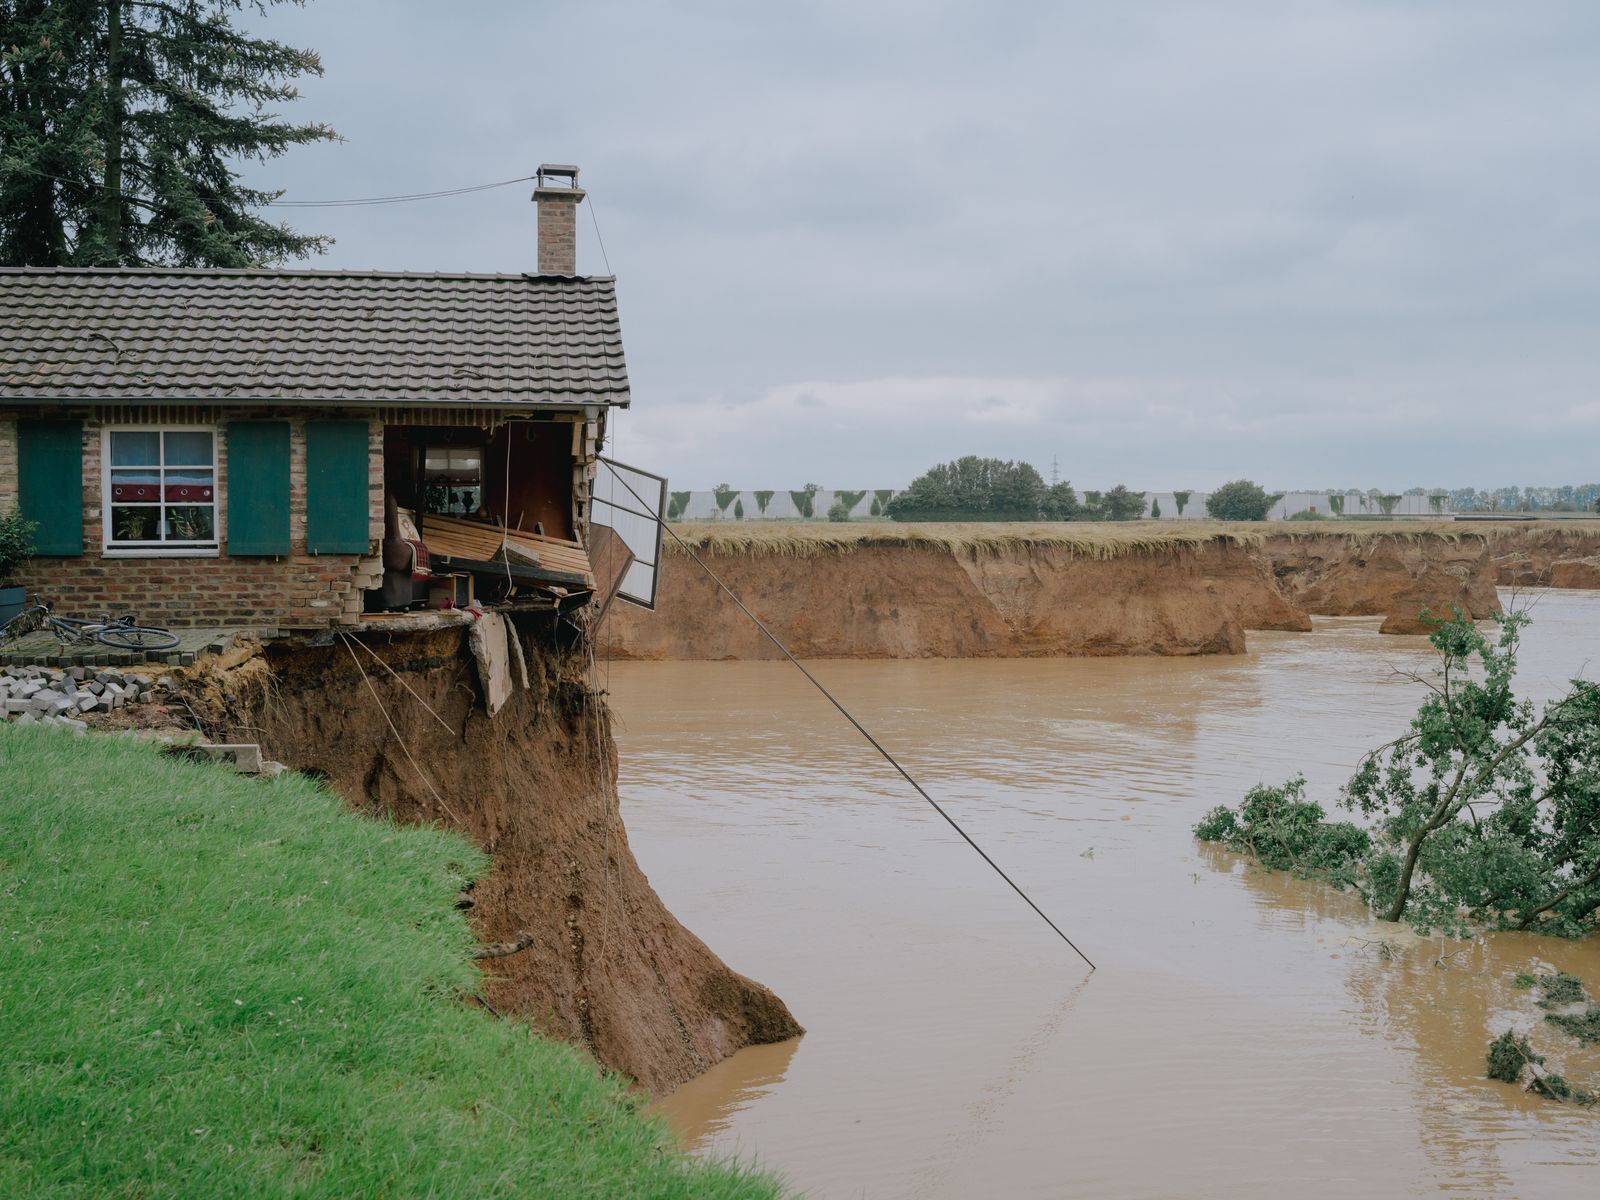 © DOCKS Collective - Image from the The Flood in Western Germany photography project